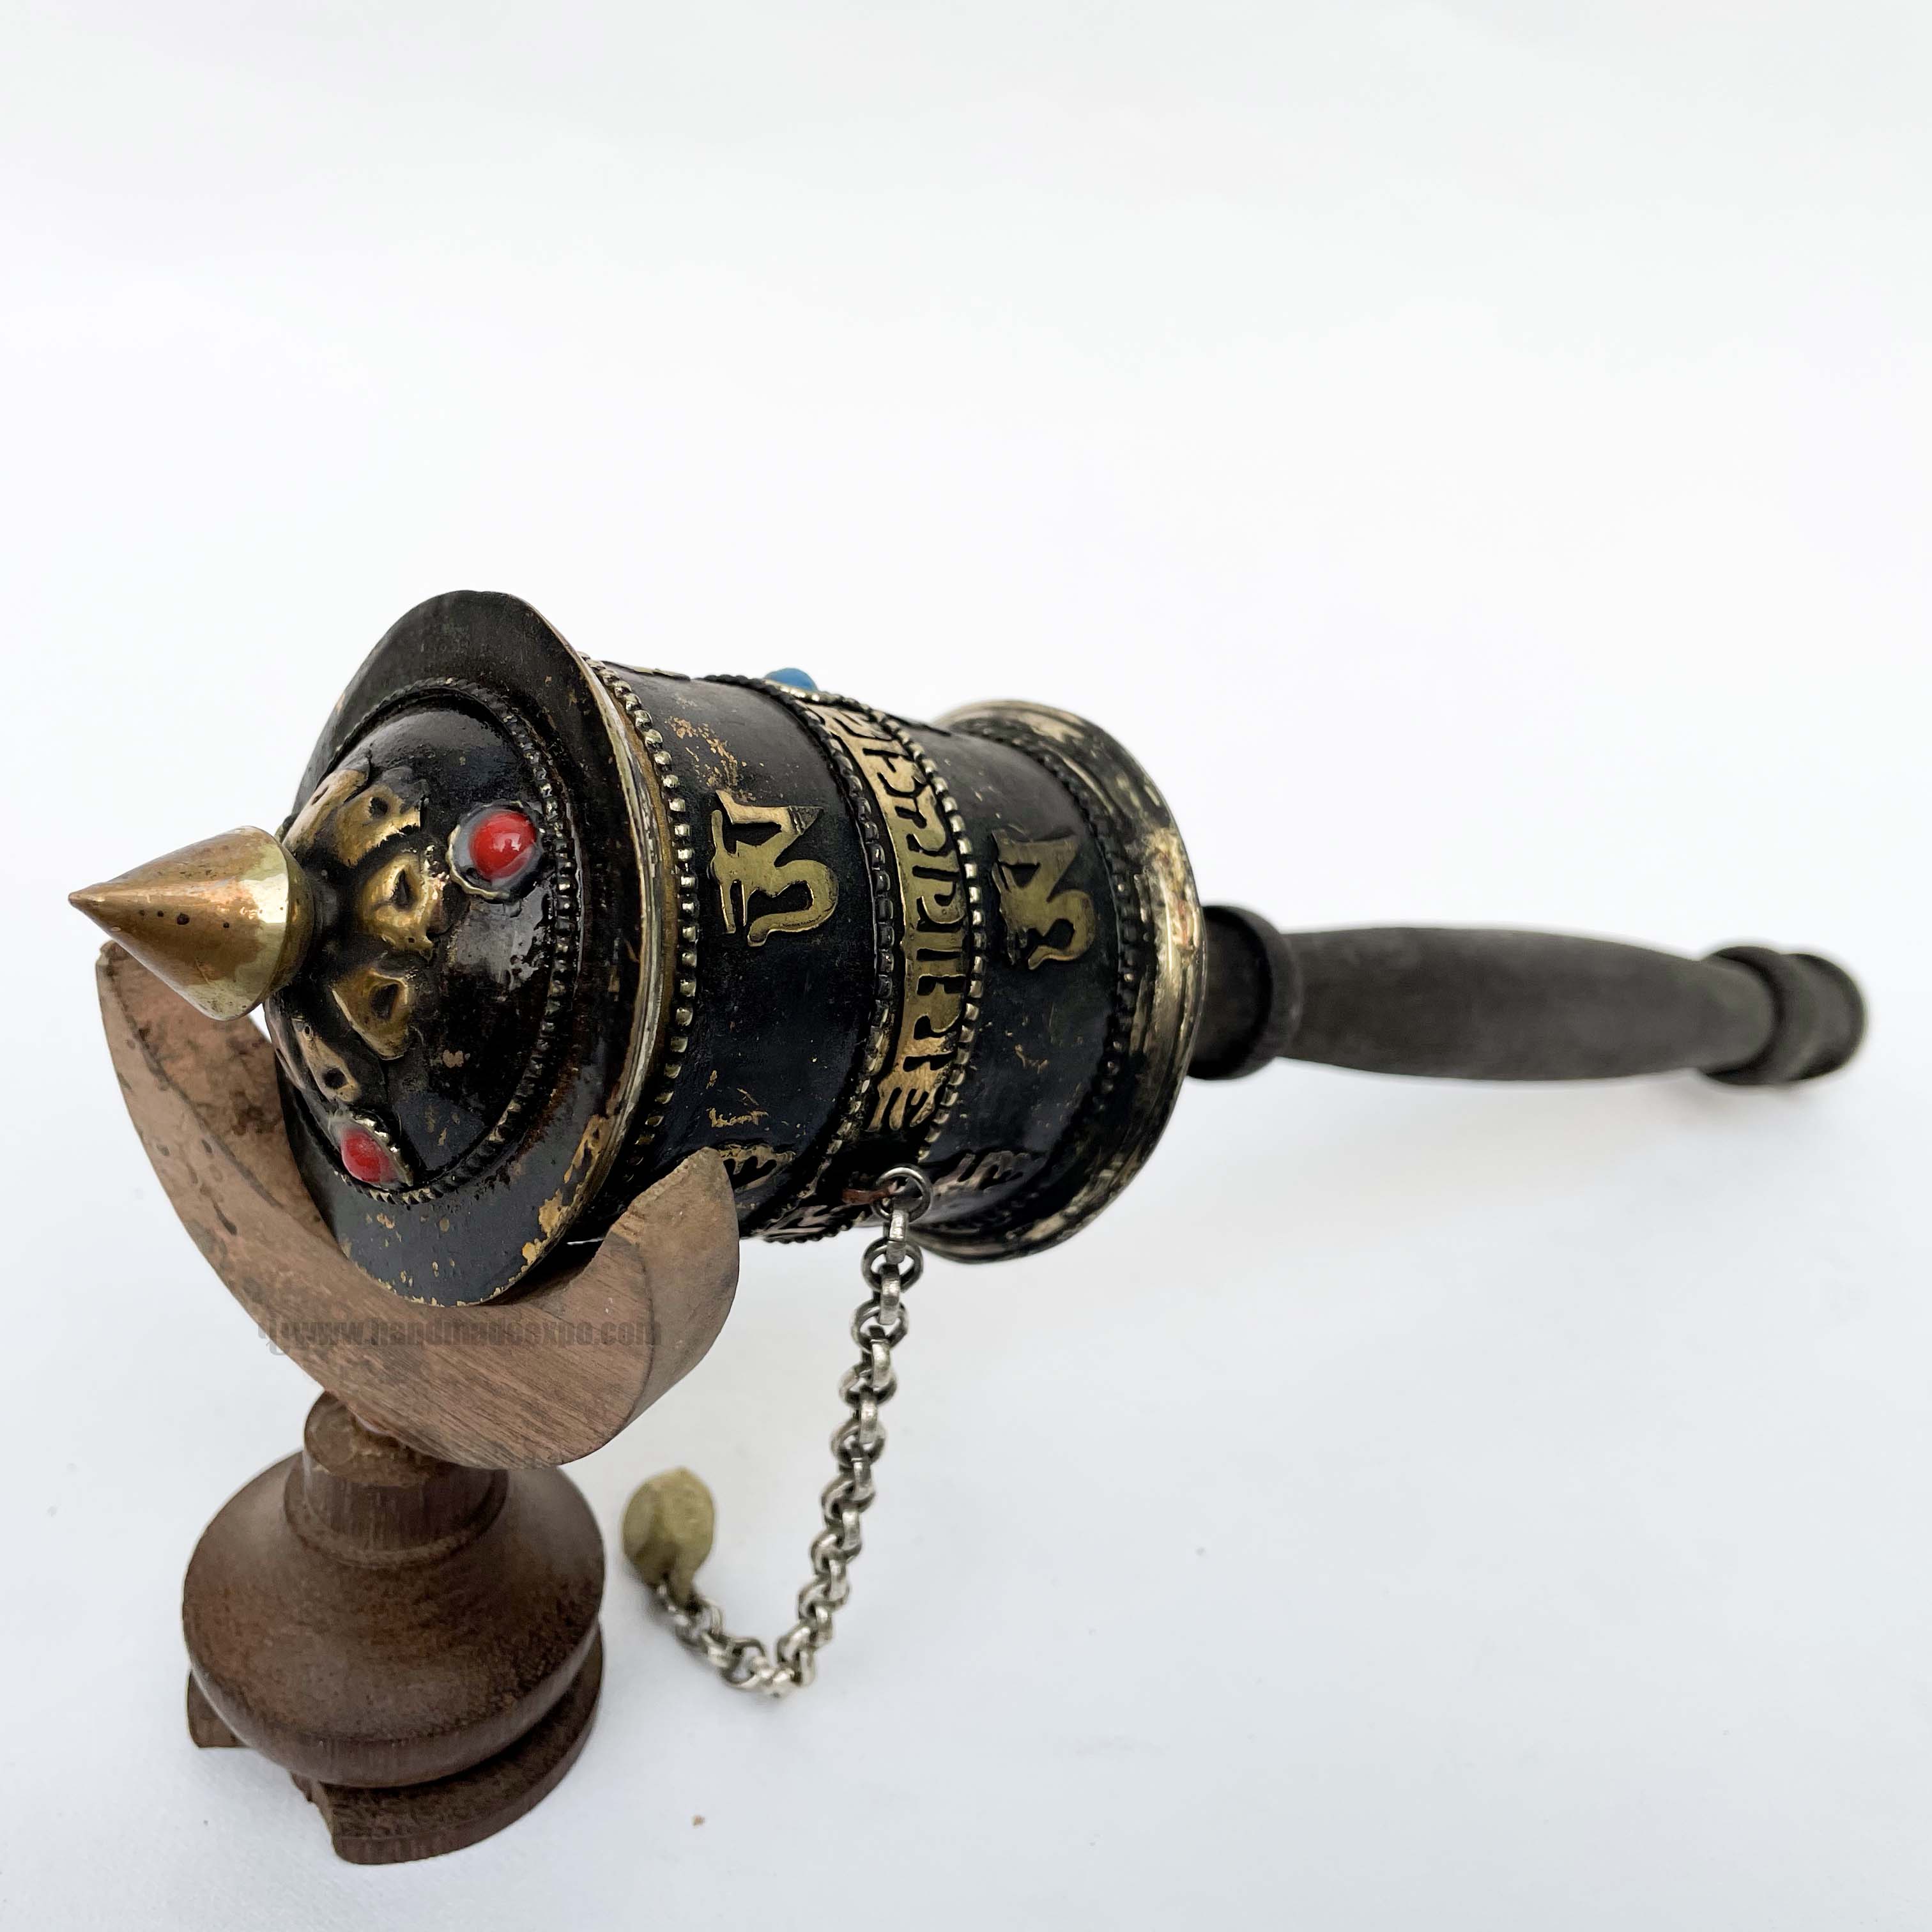 Brass Hand Held With Mantra Prayer Wheel, stone Setting, Black Color